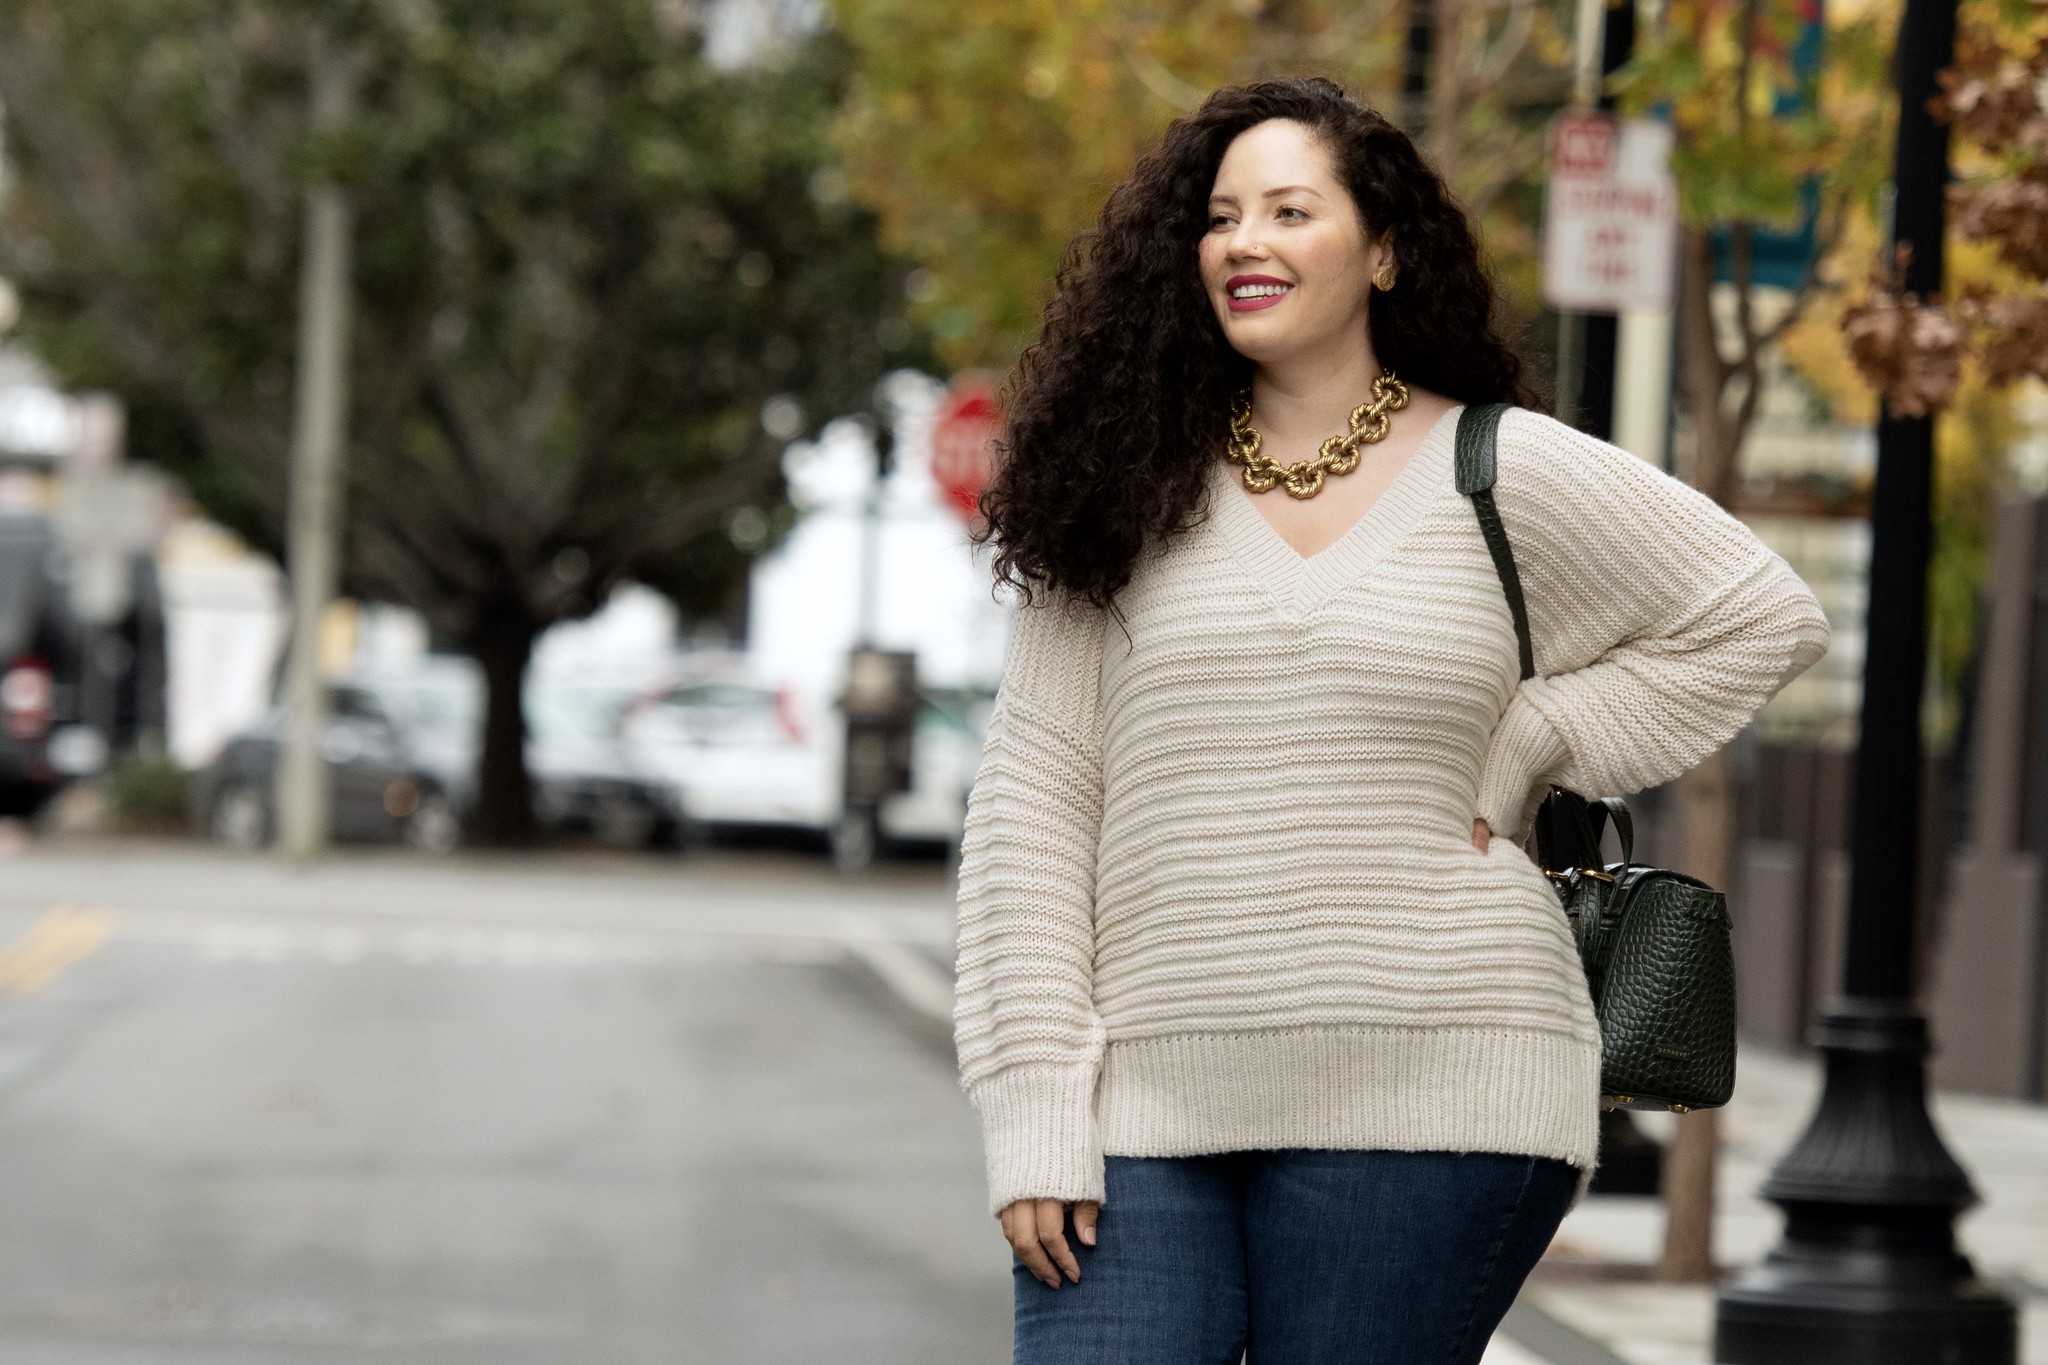 My Go-To Cold Weather Outfit Via Girl With Curves #plussizefashion #curvyfashion #plussizejeans #curvyoutfits #curvyconfidence #bopo #bodypositive #plussizeoutfits